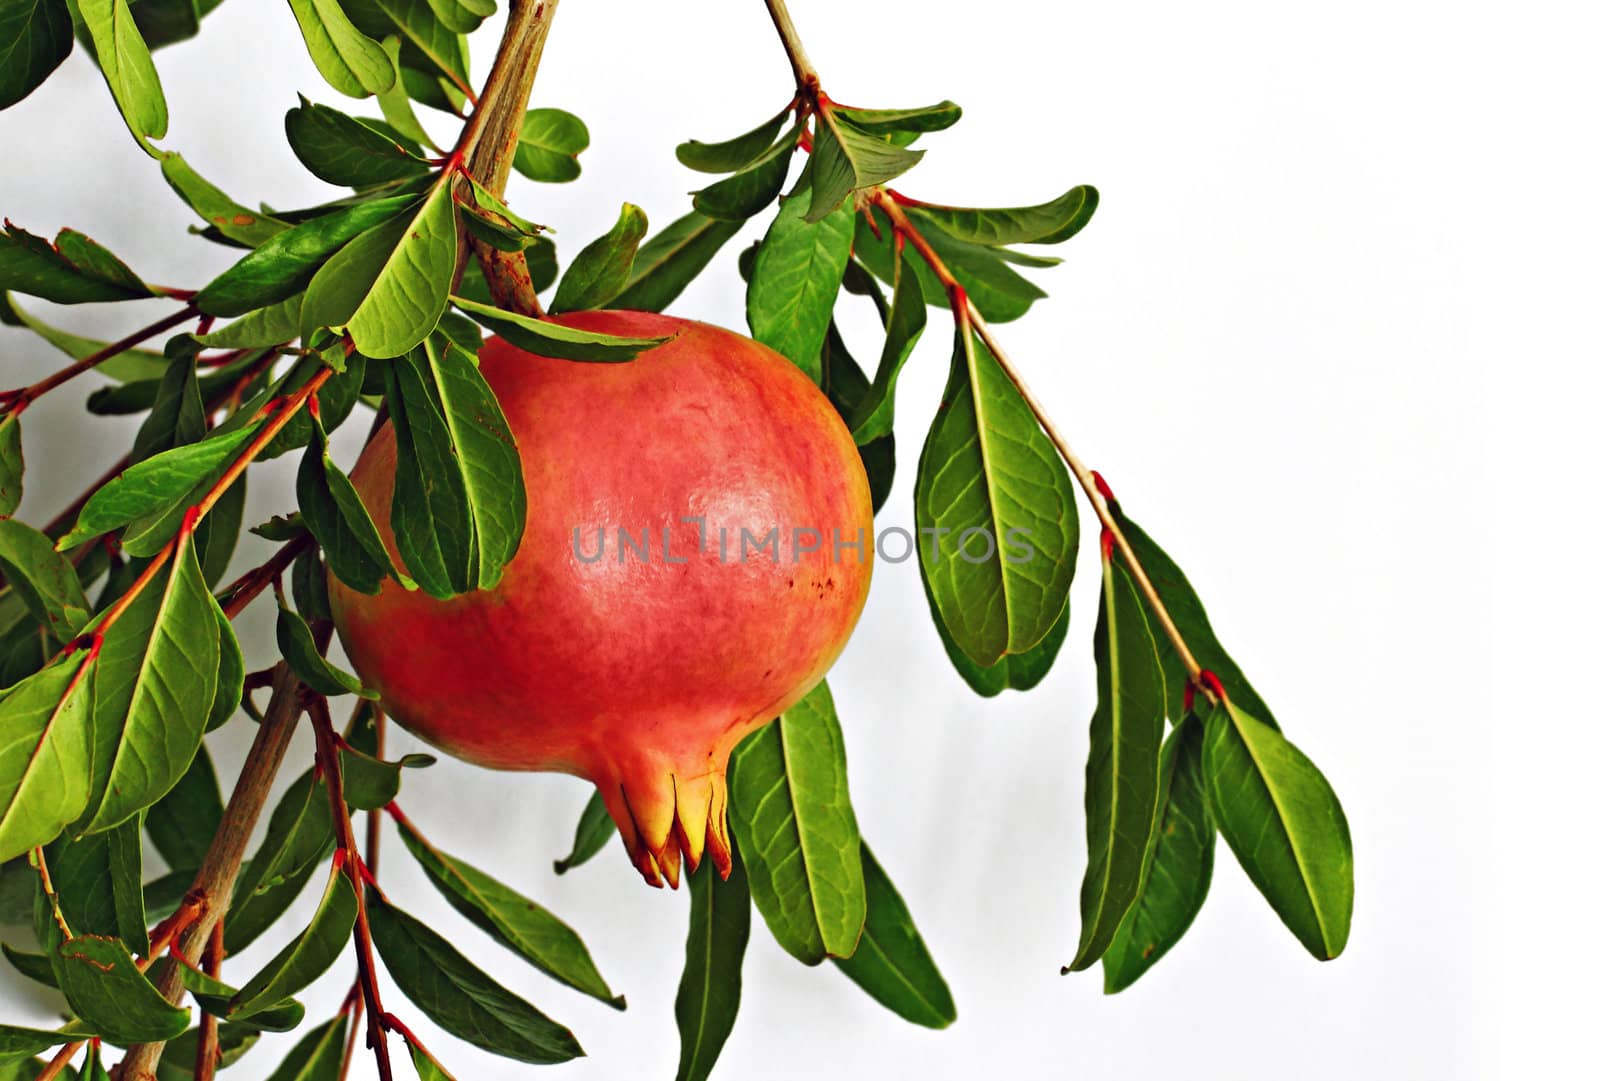 Picture of Pomegranate by DLida